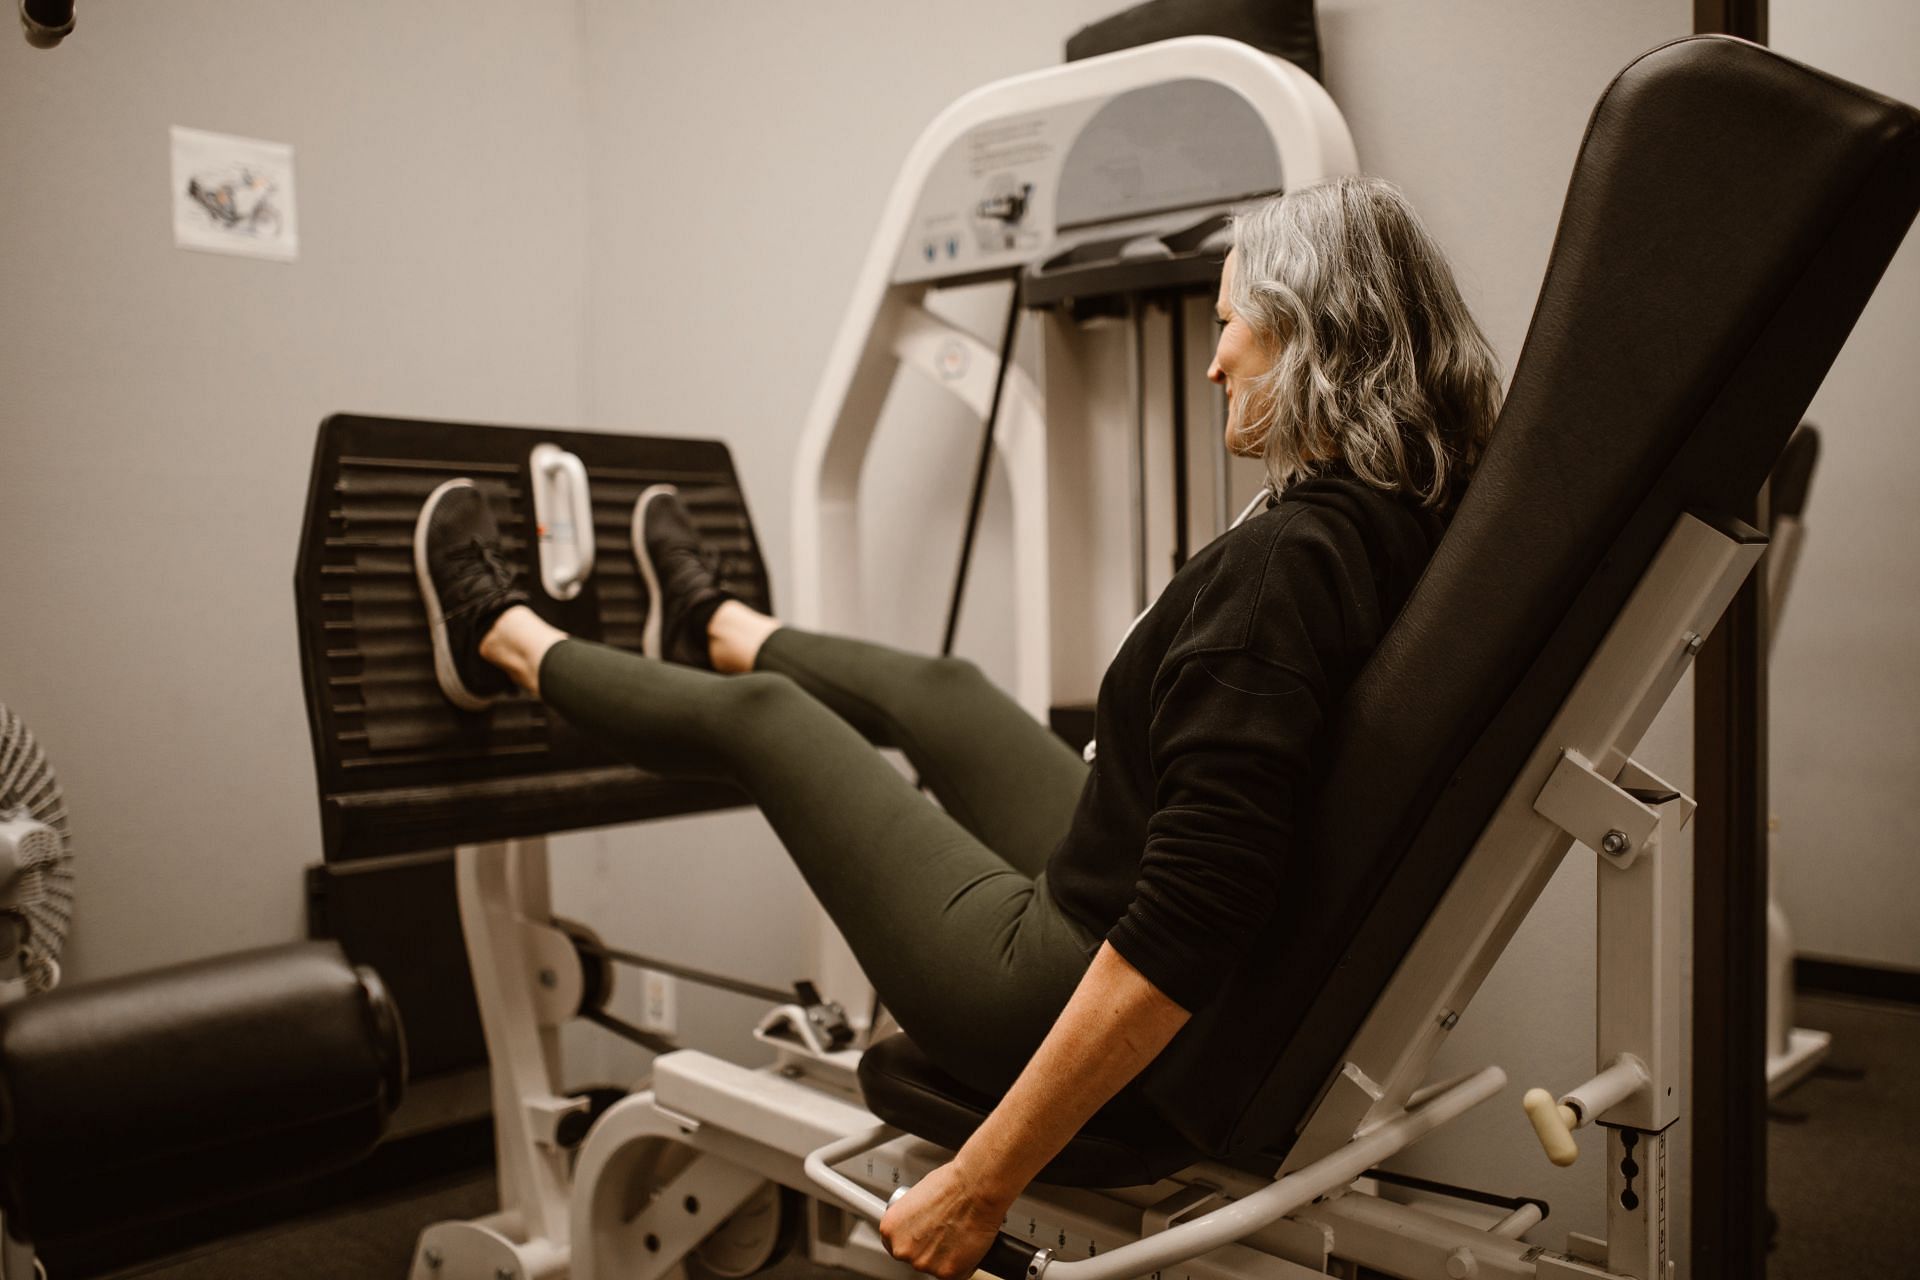 Exercise equipment for legs (Image sourced via Pexels / Photo by rdne-stock)